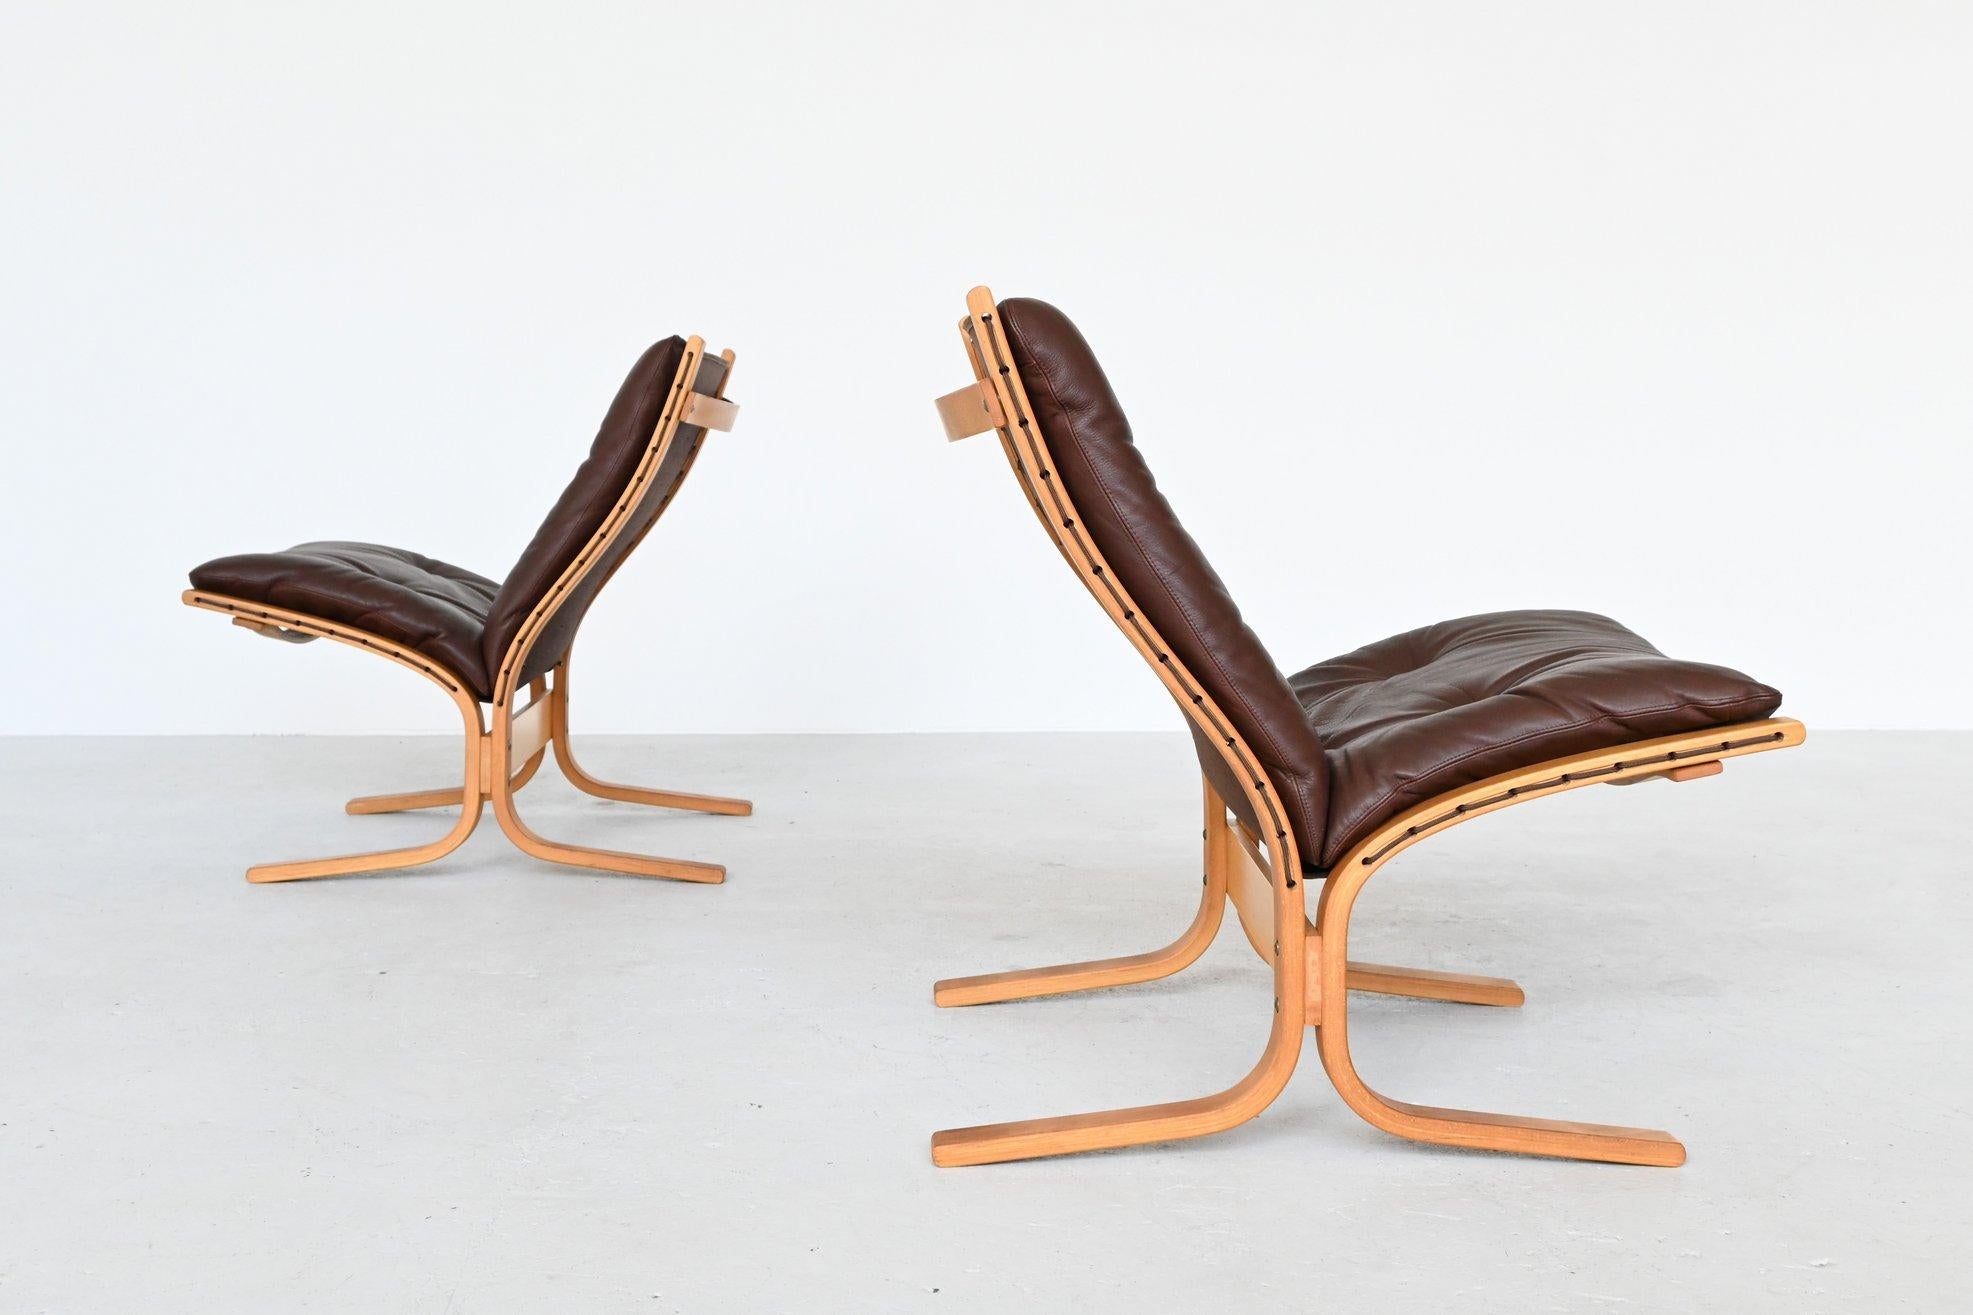 Beautiful pair of Siesta lounge chairs designed by Ingmar Relling and manufactured by Westnofa, Norway, 1960. This model is the ladies version with a low back. These very nicely shaped chairs have a beech plywood frame that features brown leather